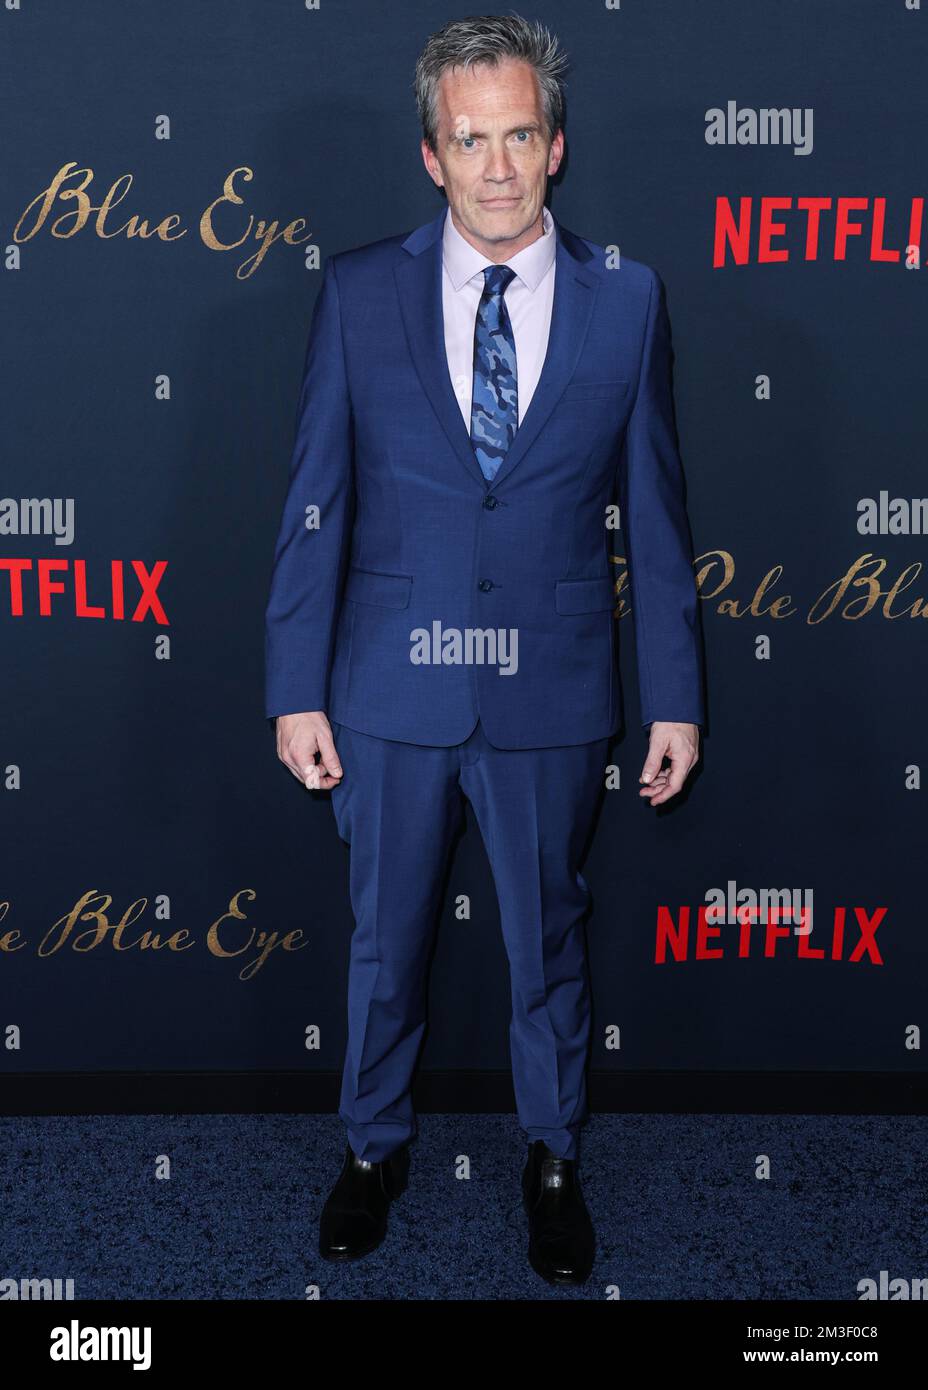 https://c8.alamy.com/comp/2M3F0C8/los-angeles-california-usa-december-14-louis-bayard-arrives-at-the-los-angeles-premiere-of-netflixs-the-pale-blue-eye-held-at-the-directors-guild-of-america-theater-complex-on-december-14-2022-in-los-angeles-california-united-states-photo-by-xavier-collinimage-press-agency-2M3F0C8.jpg